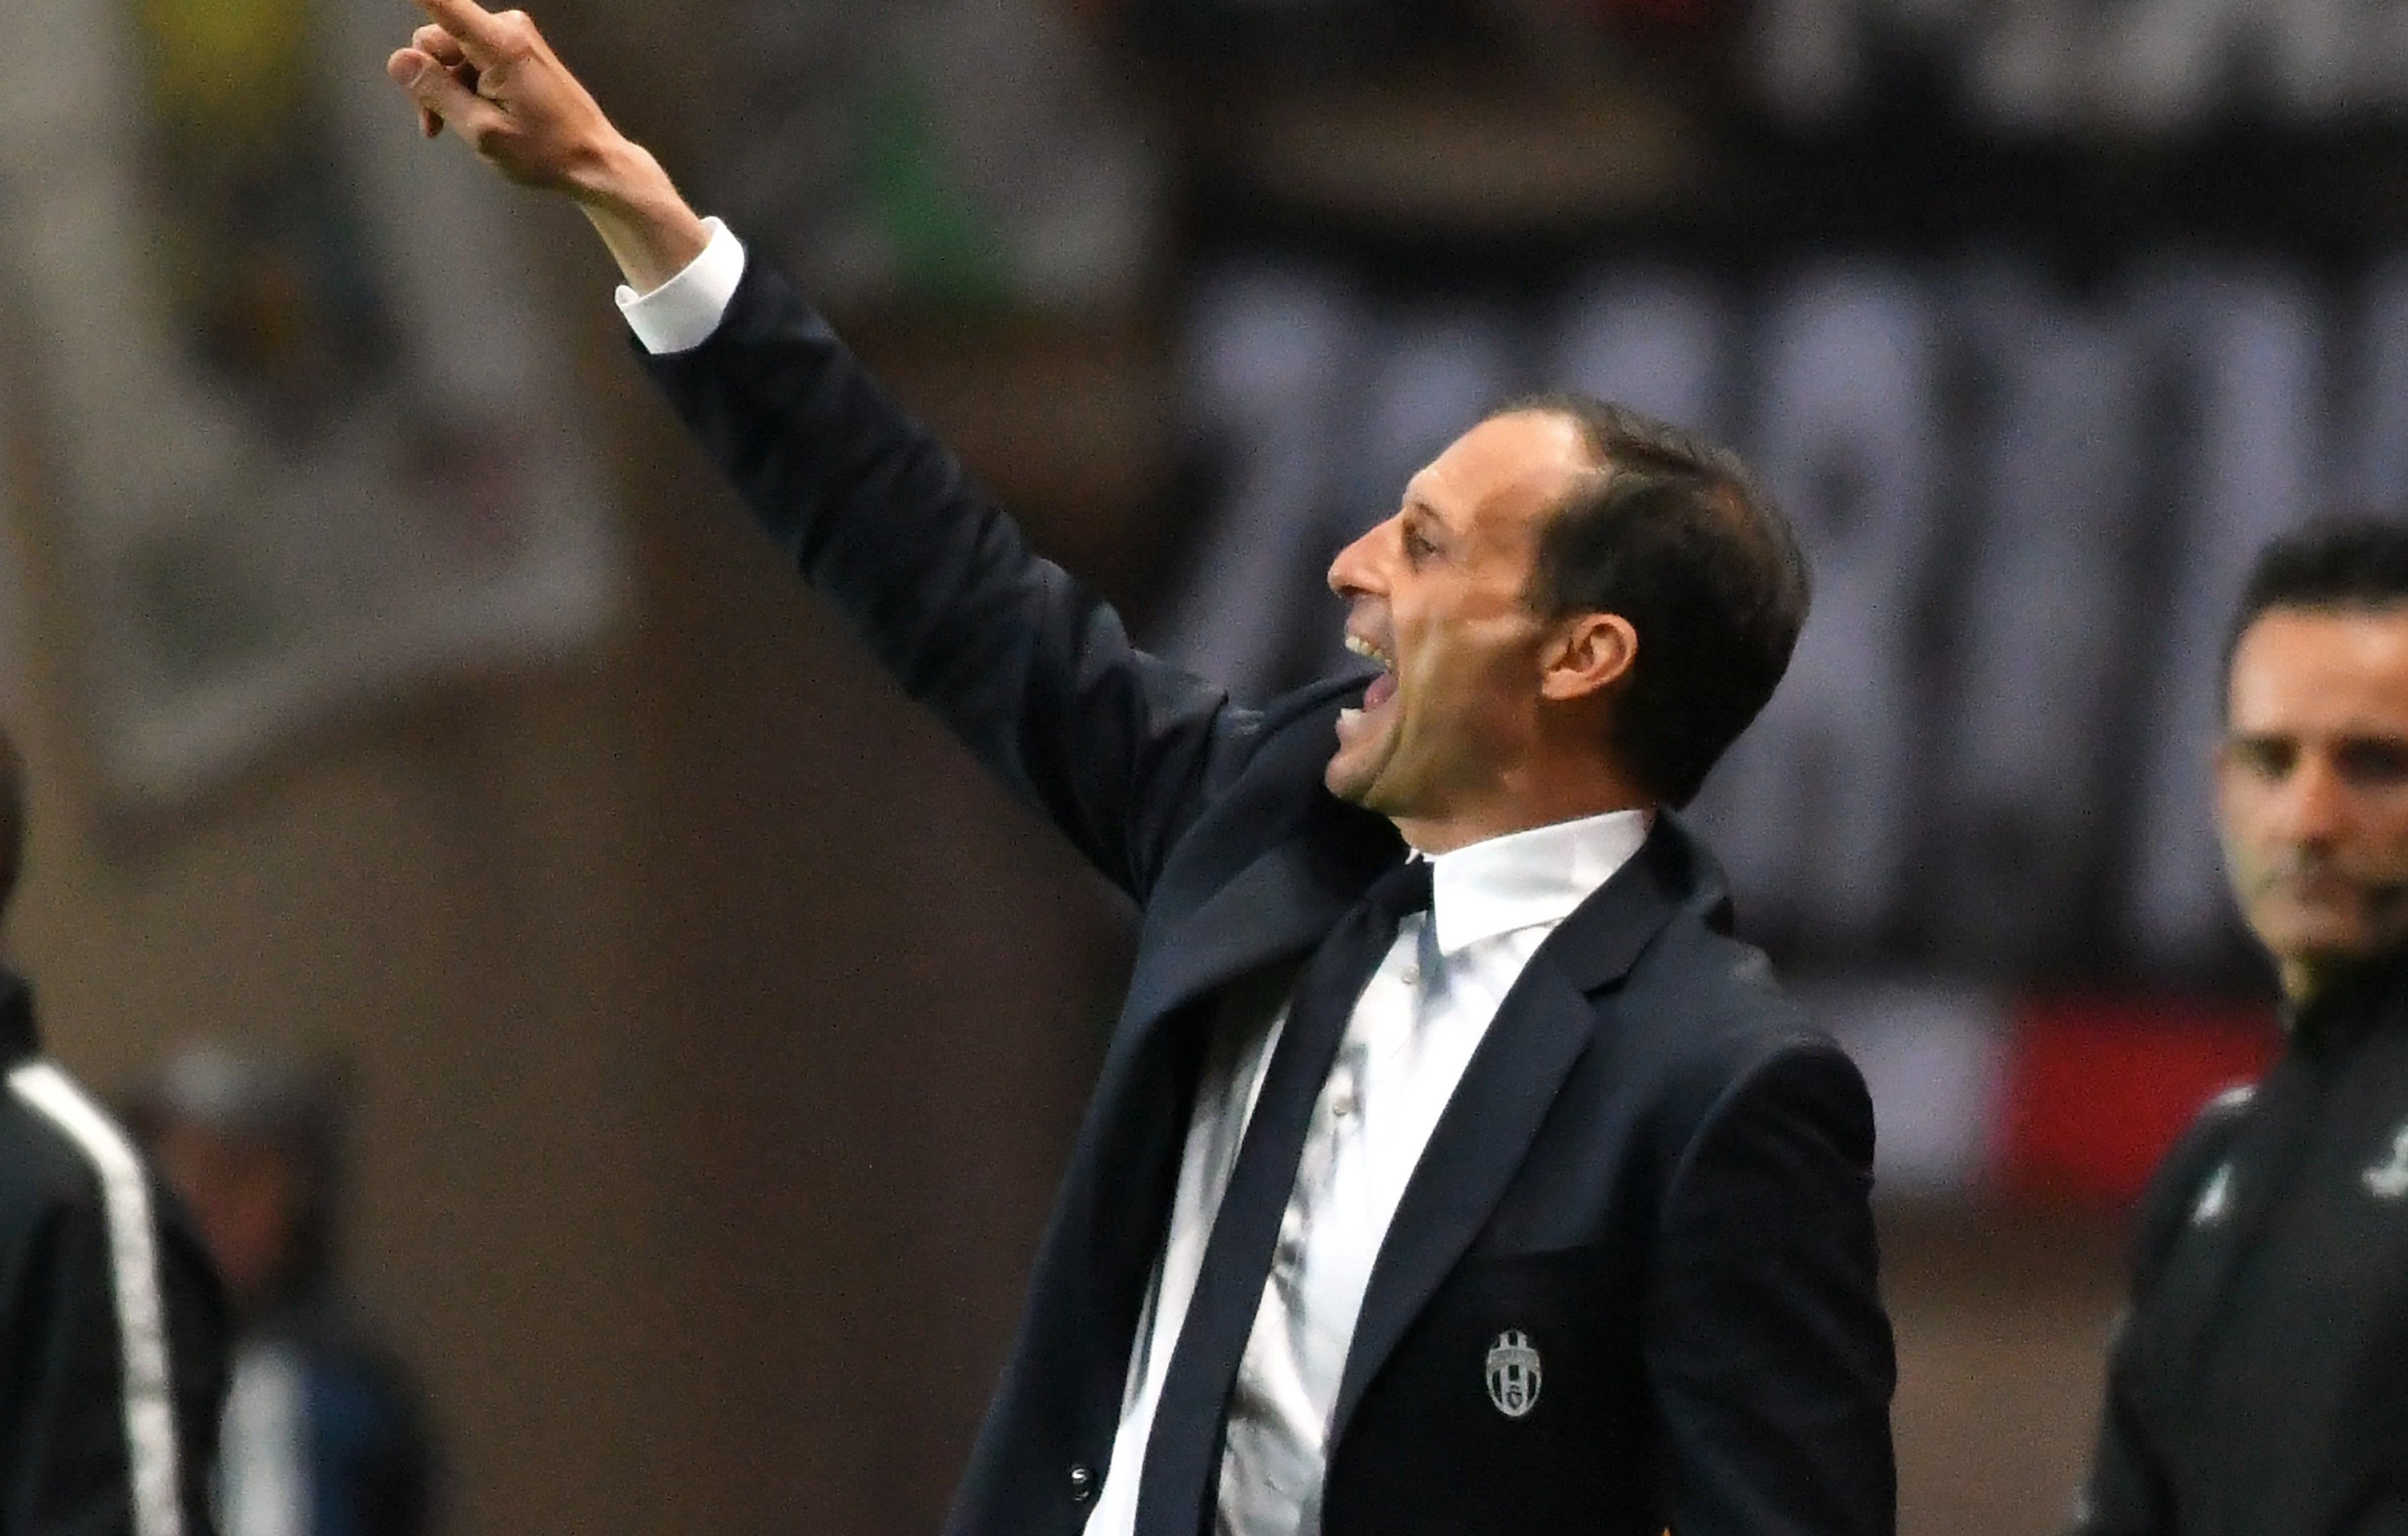 Juventus' coach from Italy Massimiliano Allegri (C) gestures during the UEFA Champions League semi-final first leg football match between Monaco and Juventus at the Stade Louis II stadium in Monaco on May 3, 2017. / AFP PHOTO / PASCAL GUYOT        (Photo credit should read PASCAL GUYOT/AFP/Getty Images)